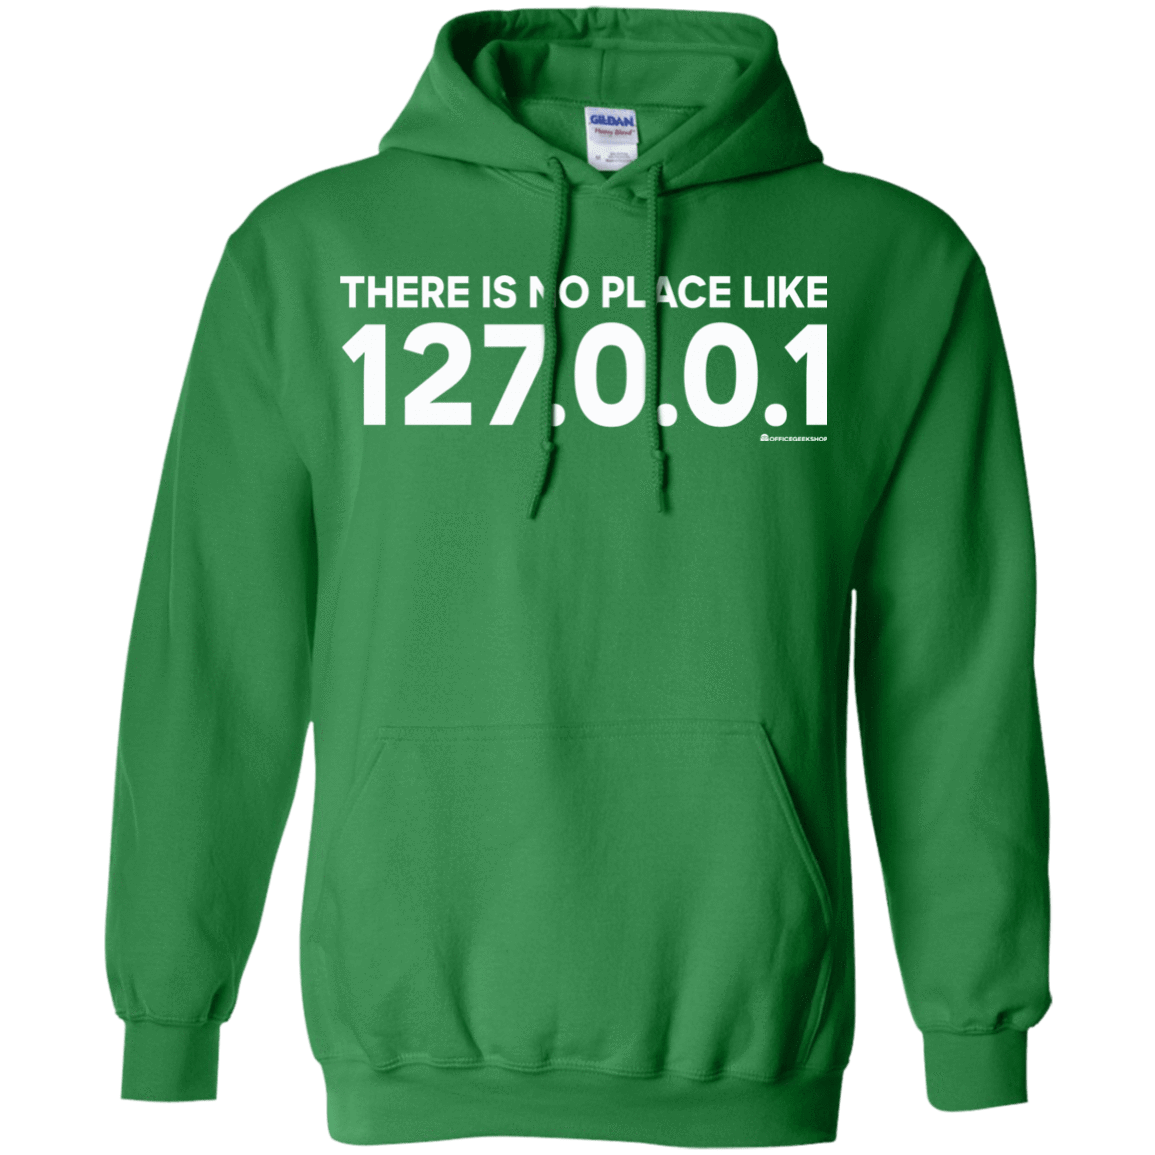 Sweatshirts Irish Green / Small There Is No Place Like 127.0.0.1 Pullover Hoodie